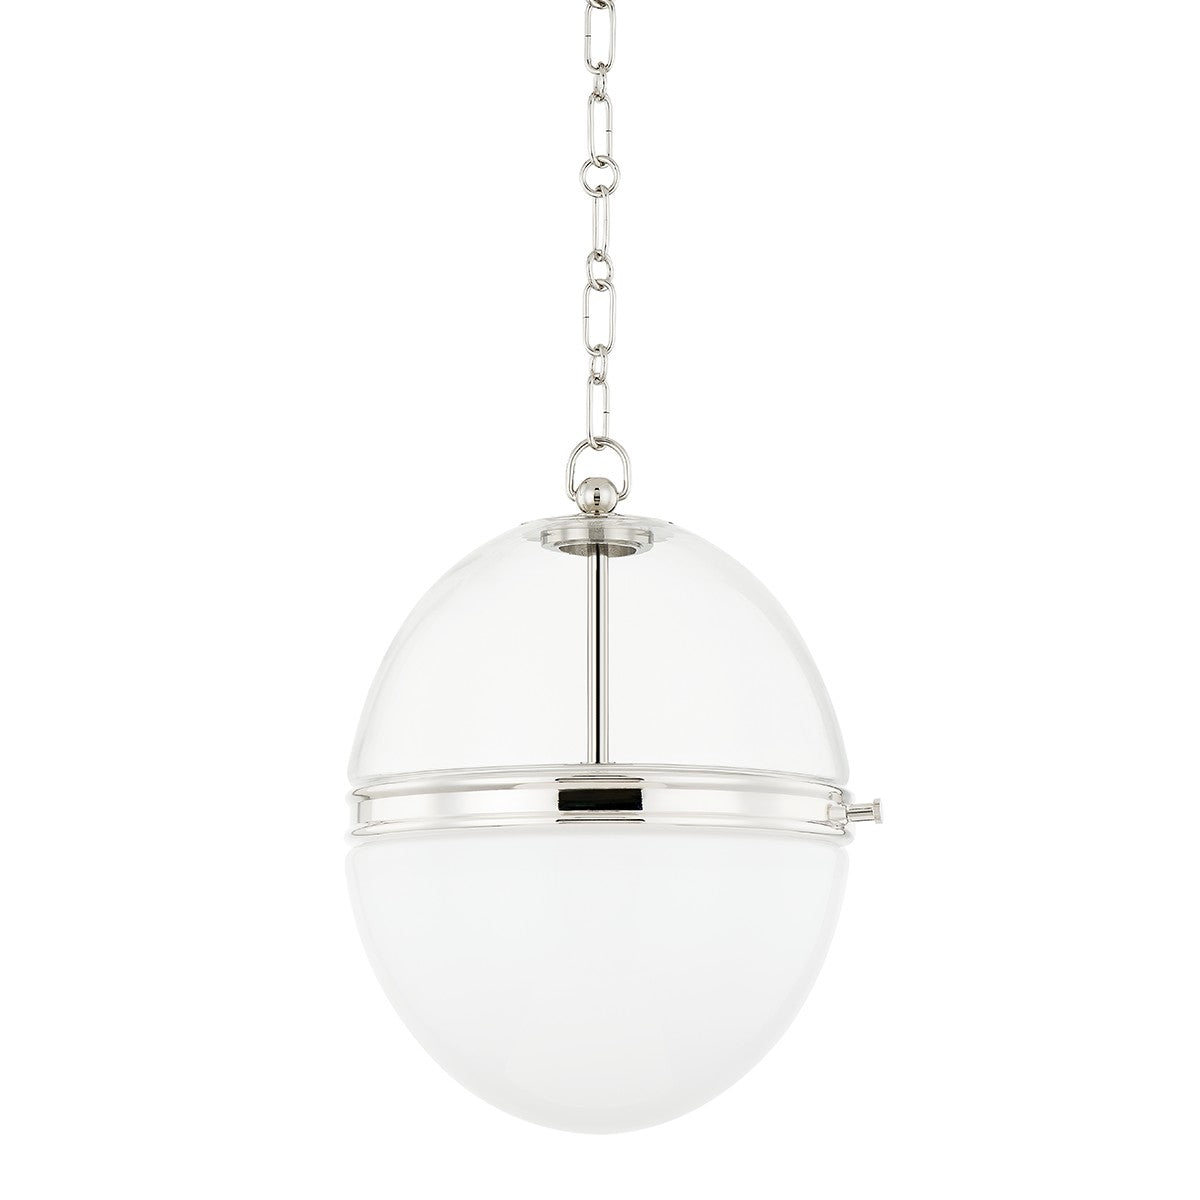 Hudson Valley - 3815-PN - One Light Pendant - Donnell - Polished Nickel